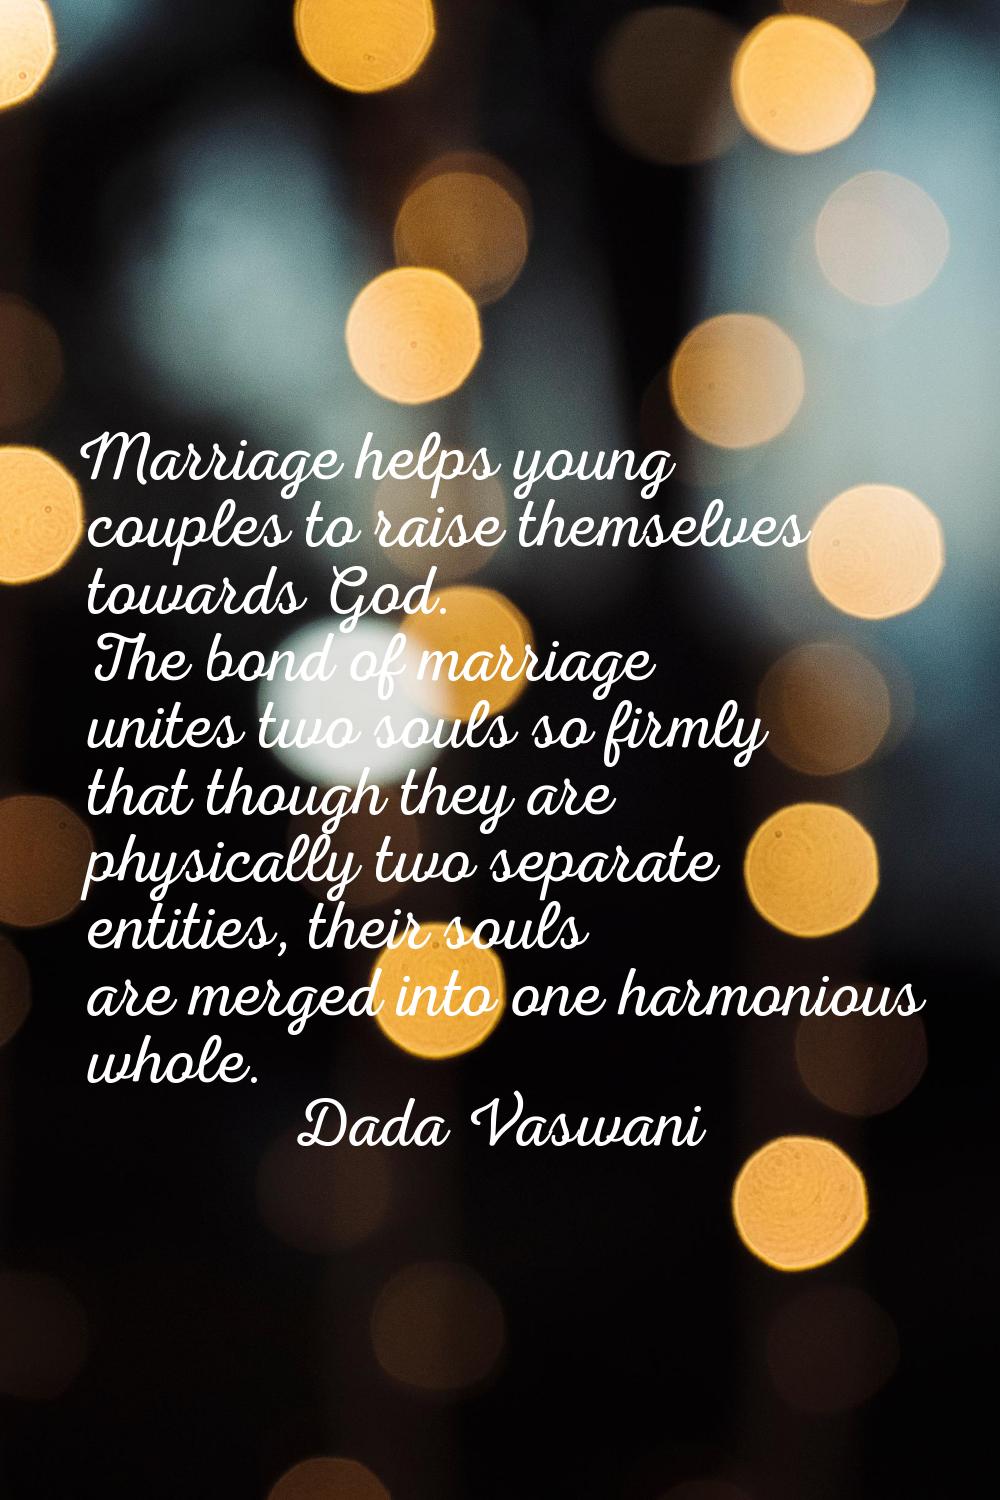 Marriage helps young couples to raise themselves towards God. The bond of marriage unites two souls